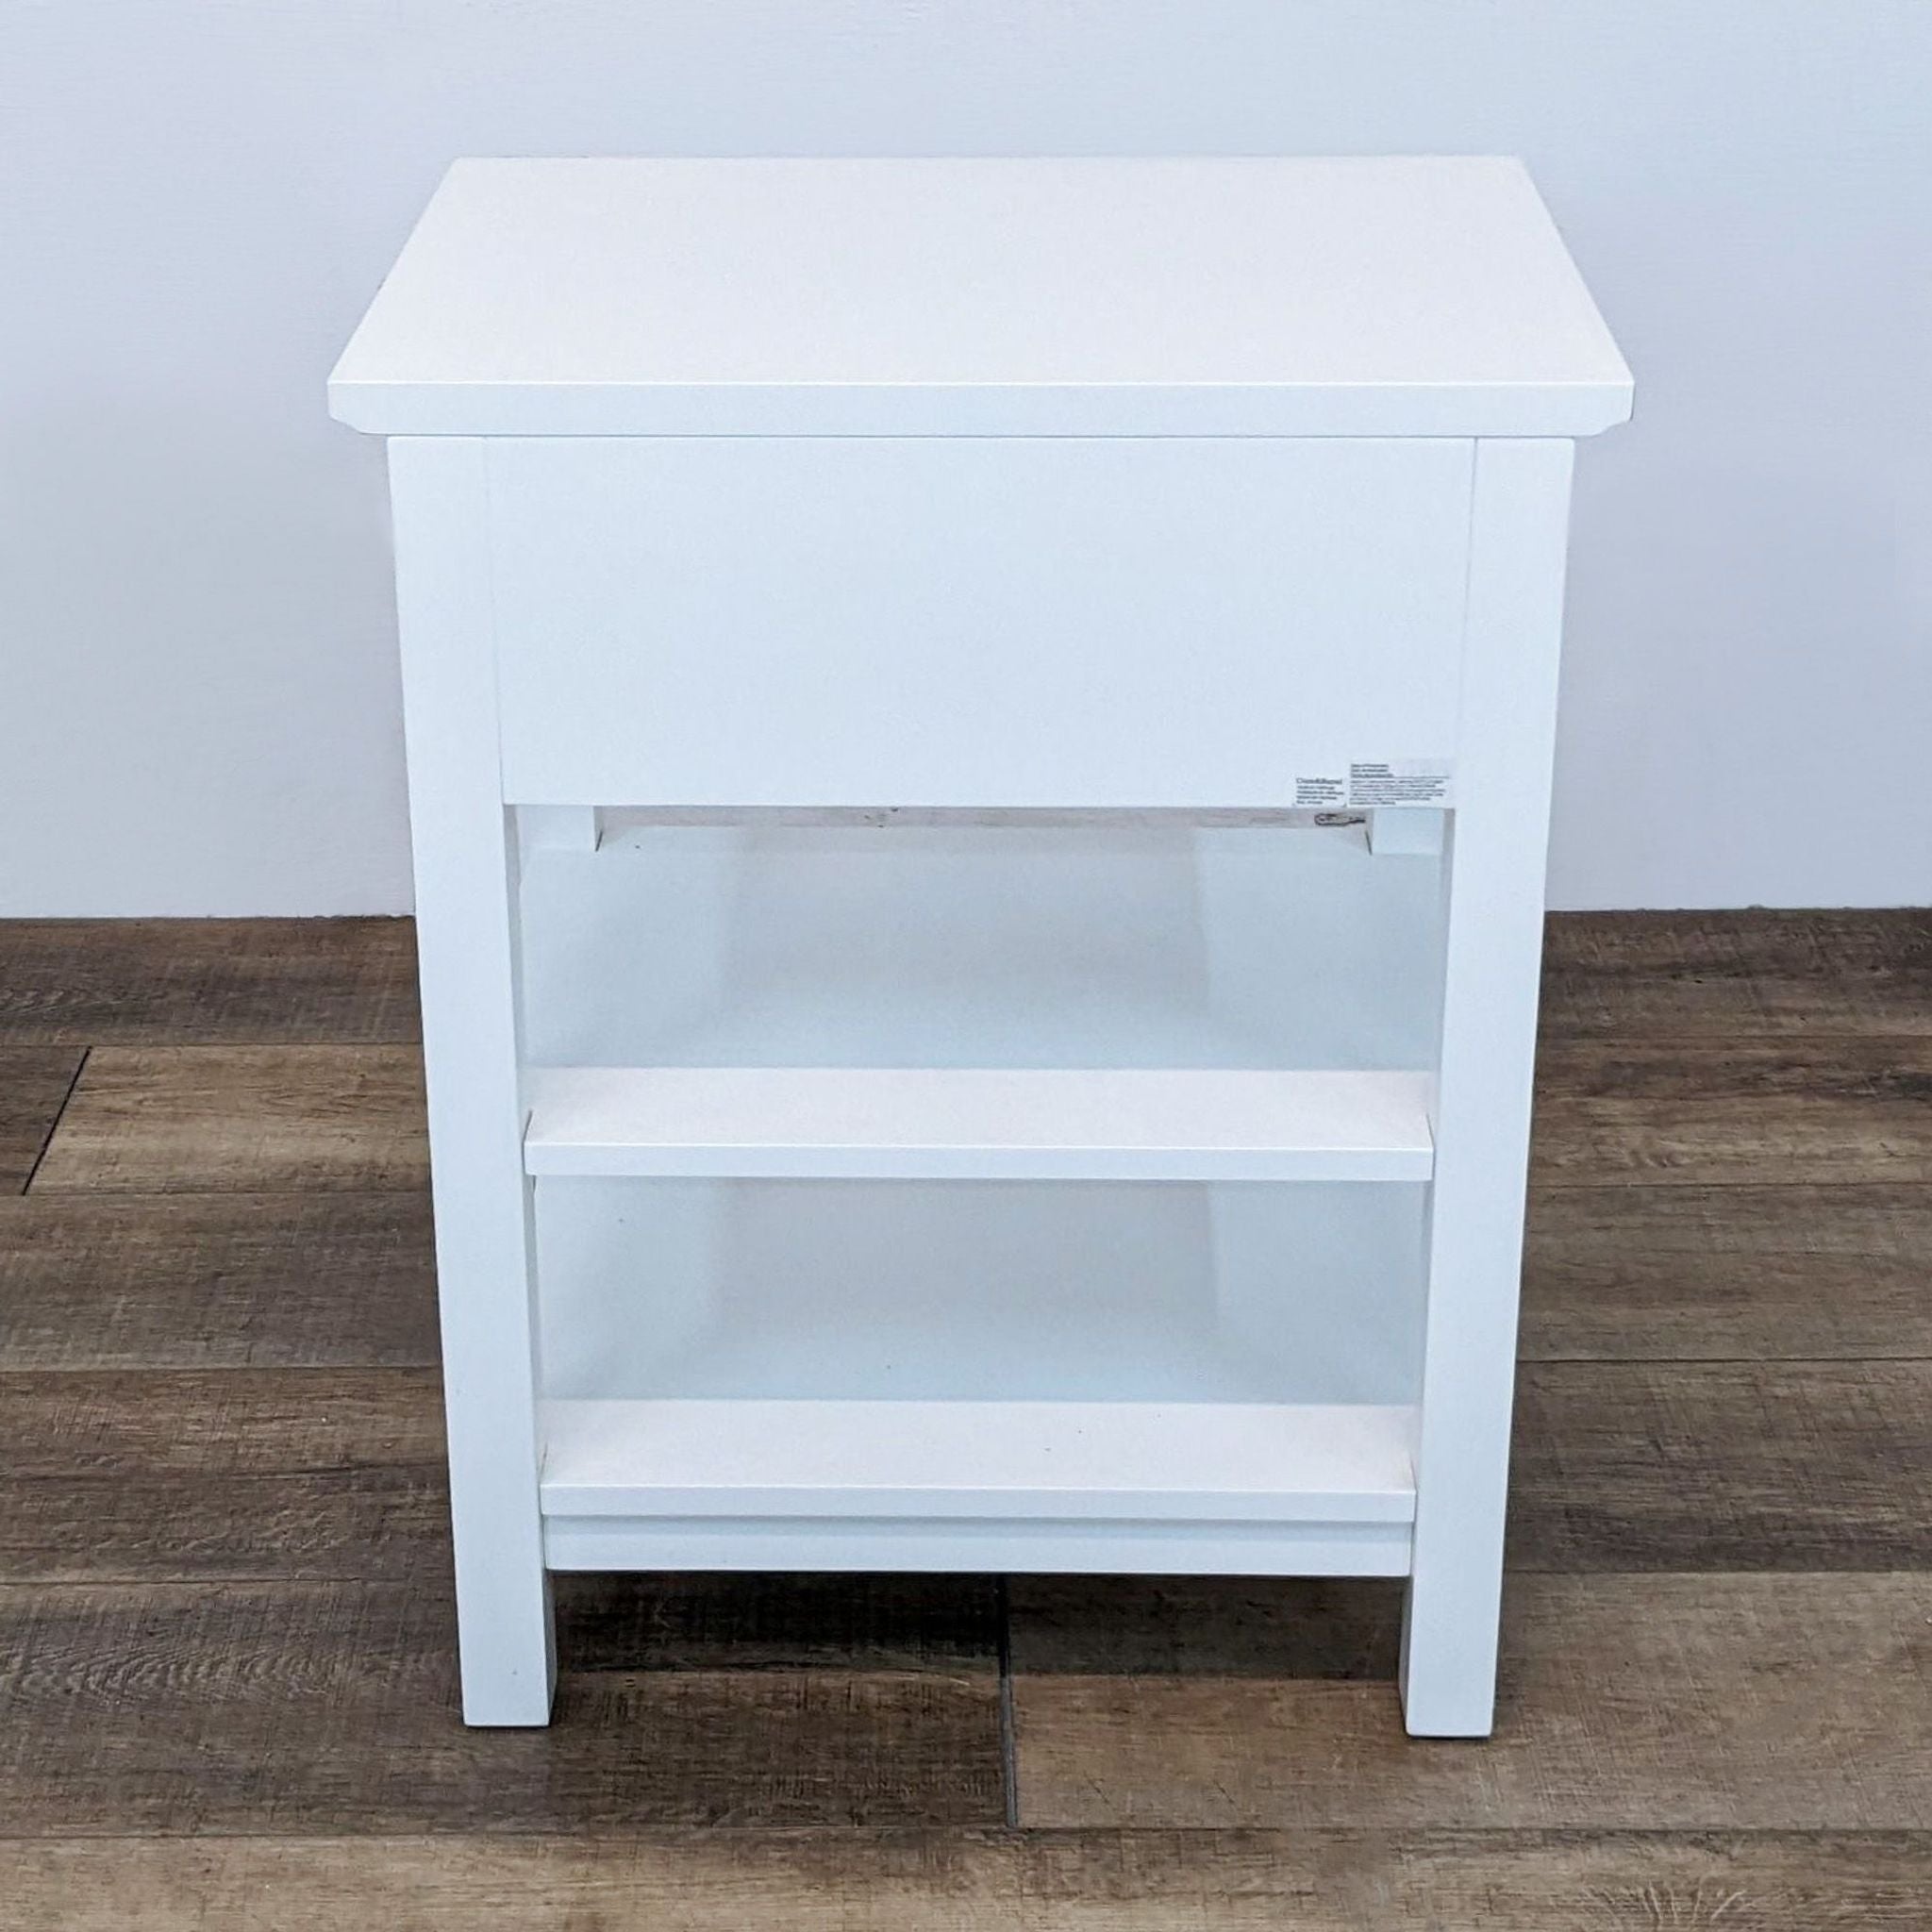 3. Front view of a white Crate & Barrel end table with a closed drawer and an open lower shelf, against a plain background.